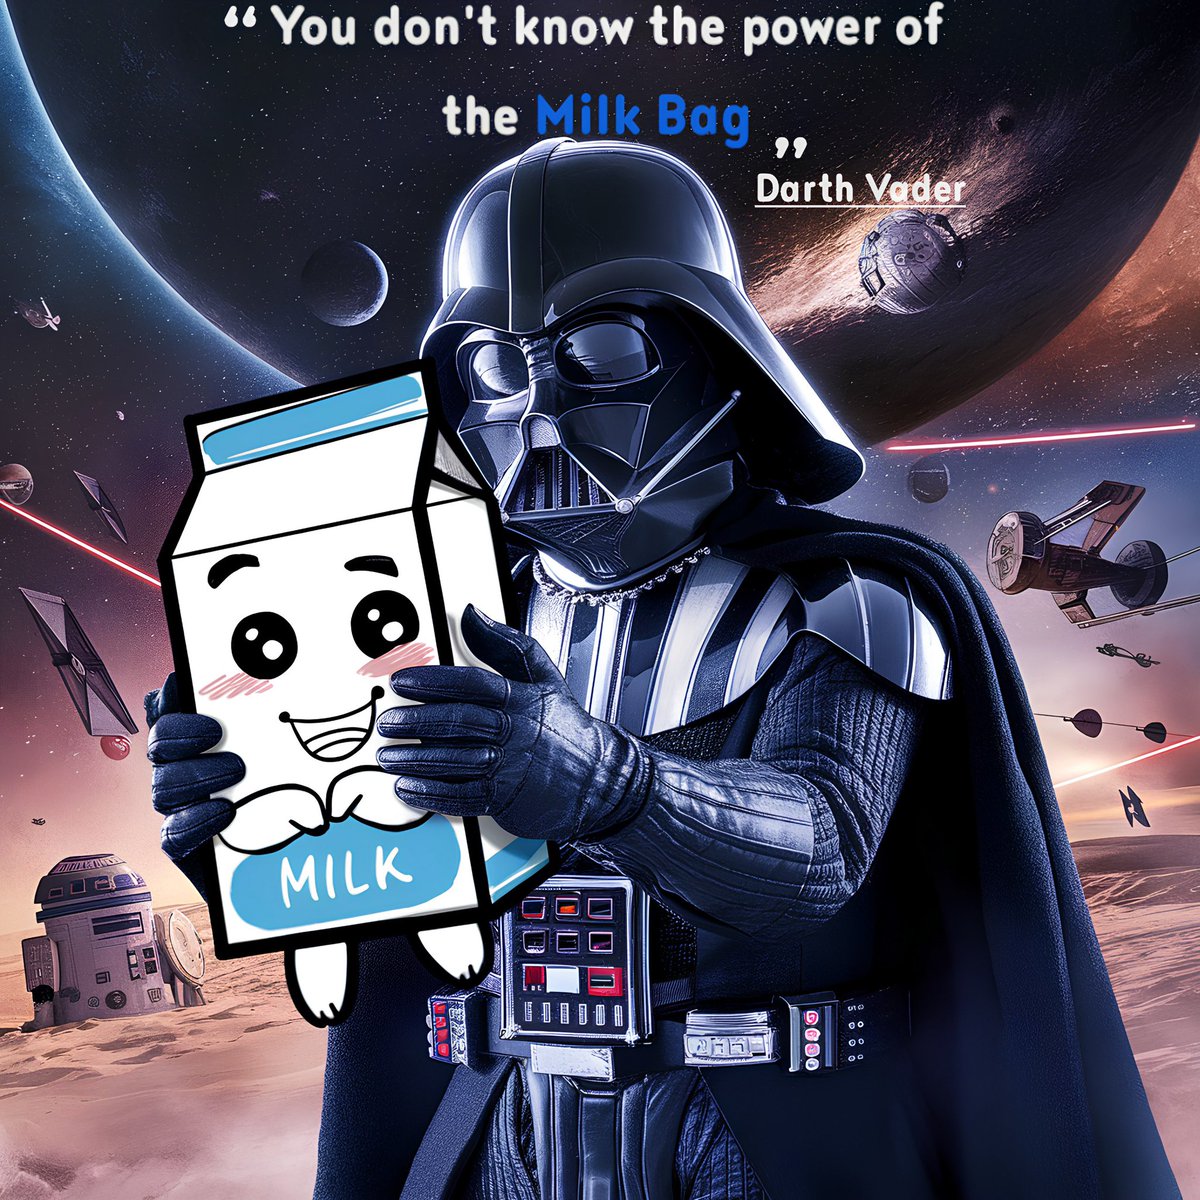 ⚔️“The force is too strong with this one.” -Darth Vader on #milkbag

@MilkbagSol #StarWarsCelebration 
#SolanaMemecoin 
#1000xgem